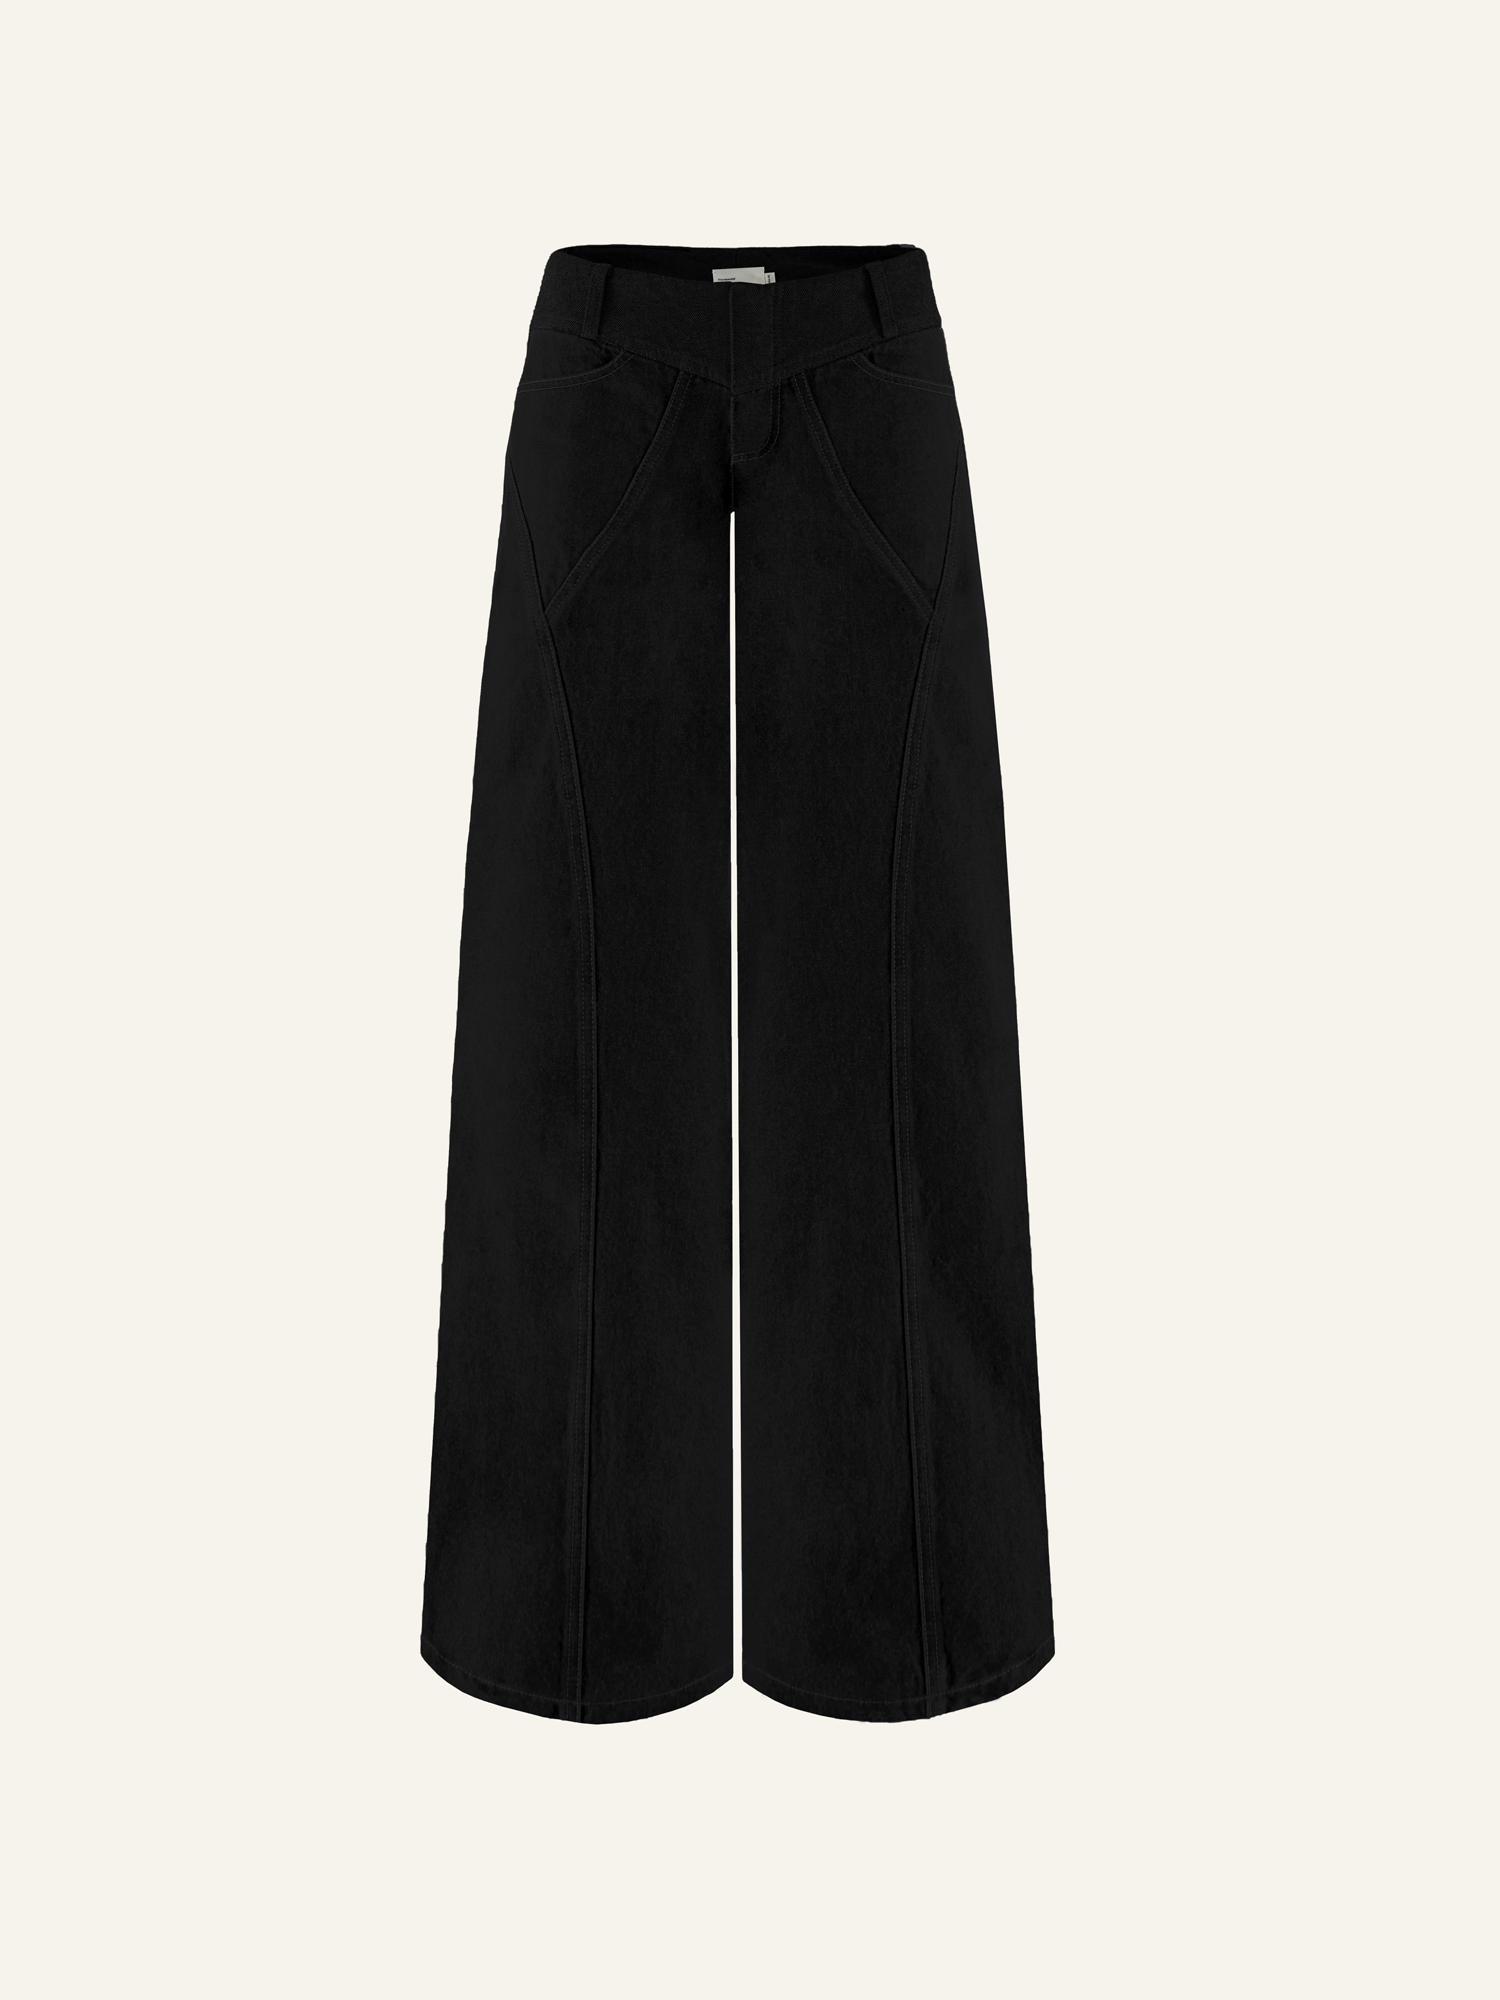 Product photo of black wide leg jeans with low rise